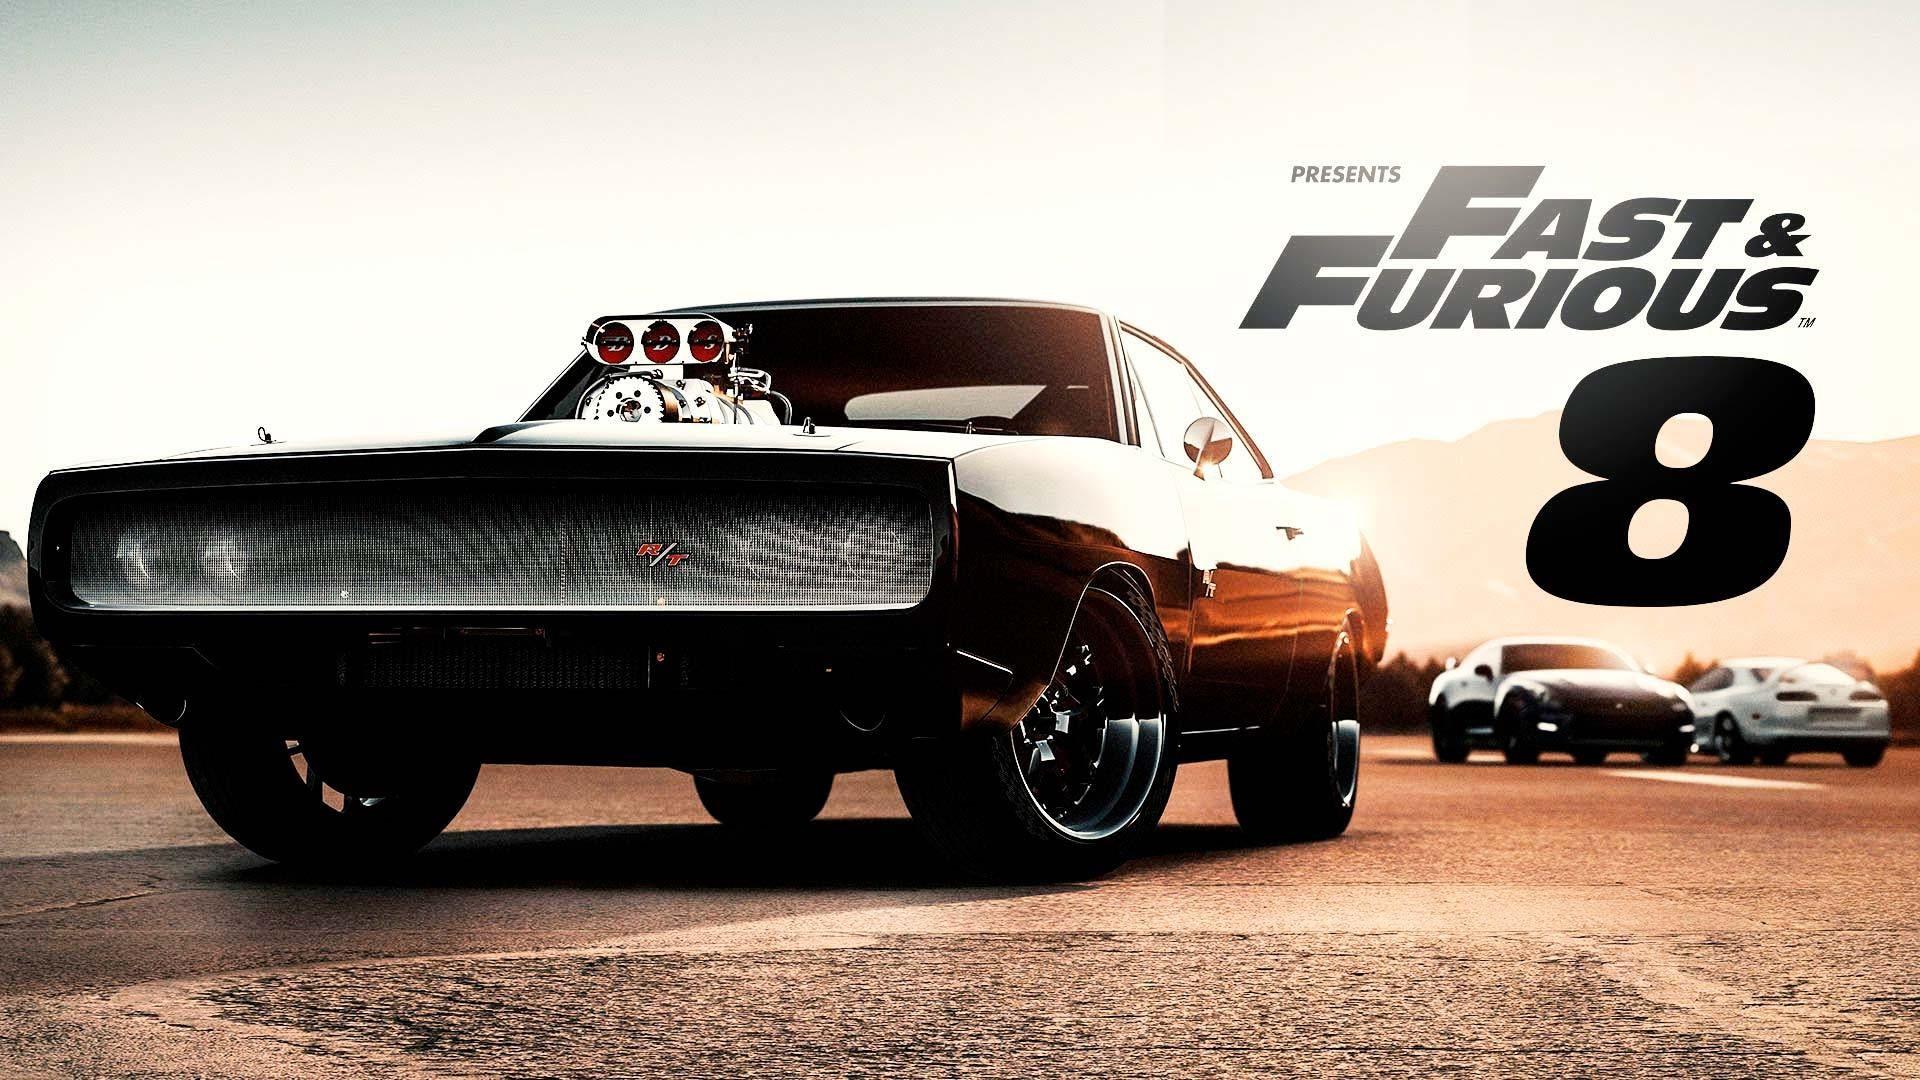 Fast And Furious Cars Wallpaper Wallpaper. Fast and furious, Fate of the furious, The furious